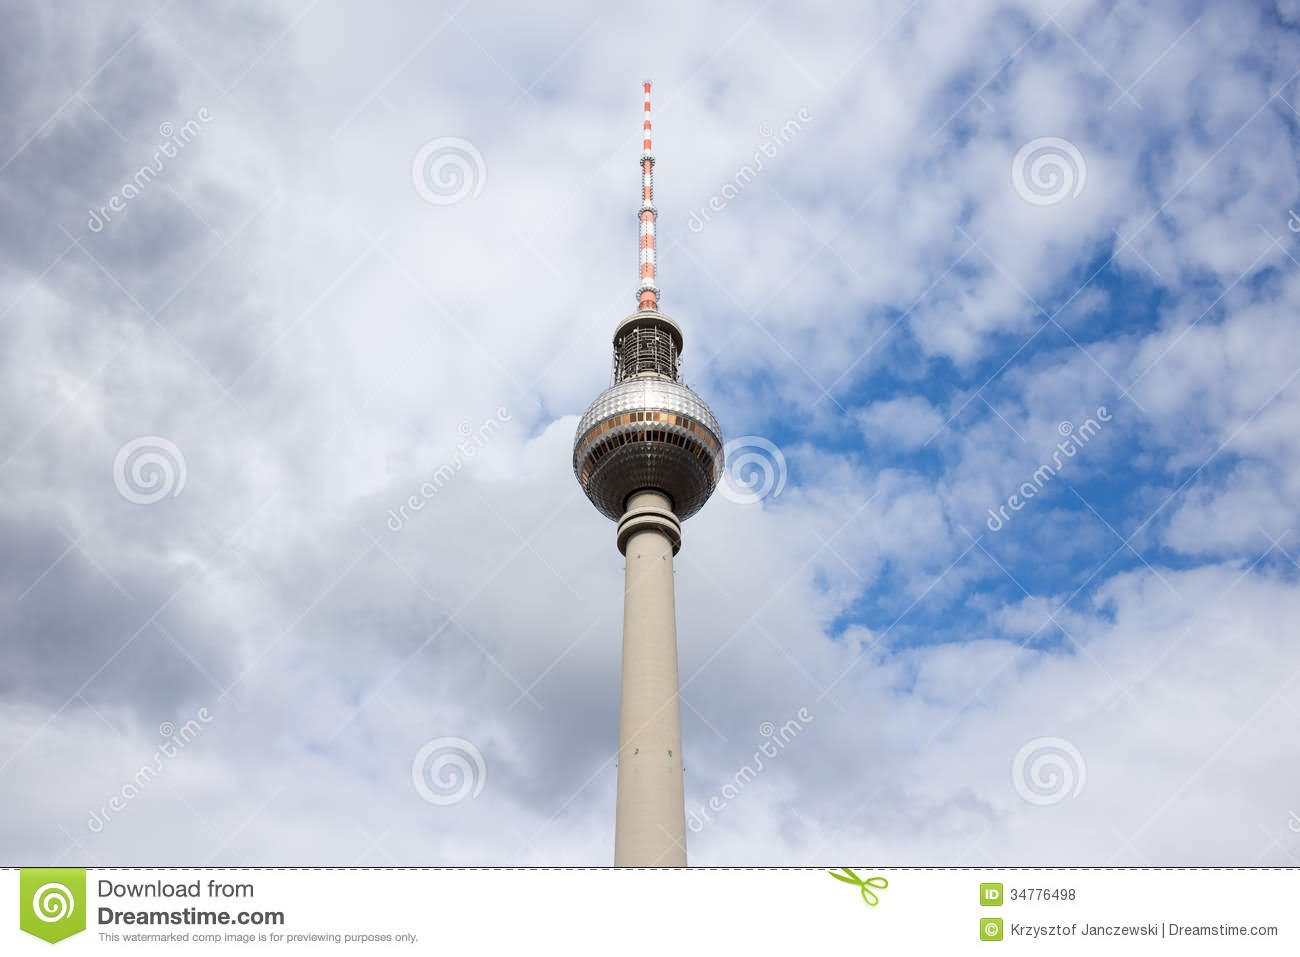 Incredible View Of The Fernsehturm Tower In Berlin